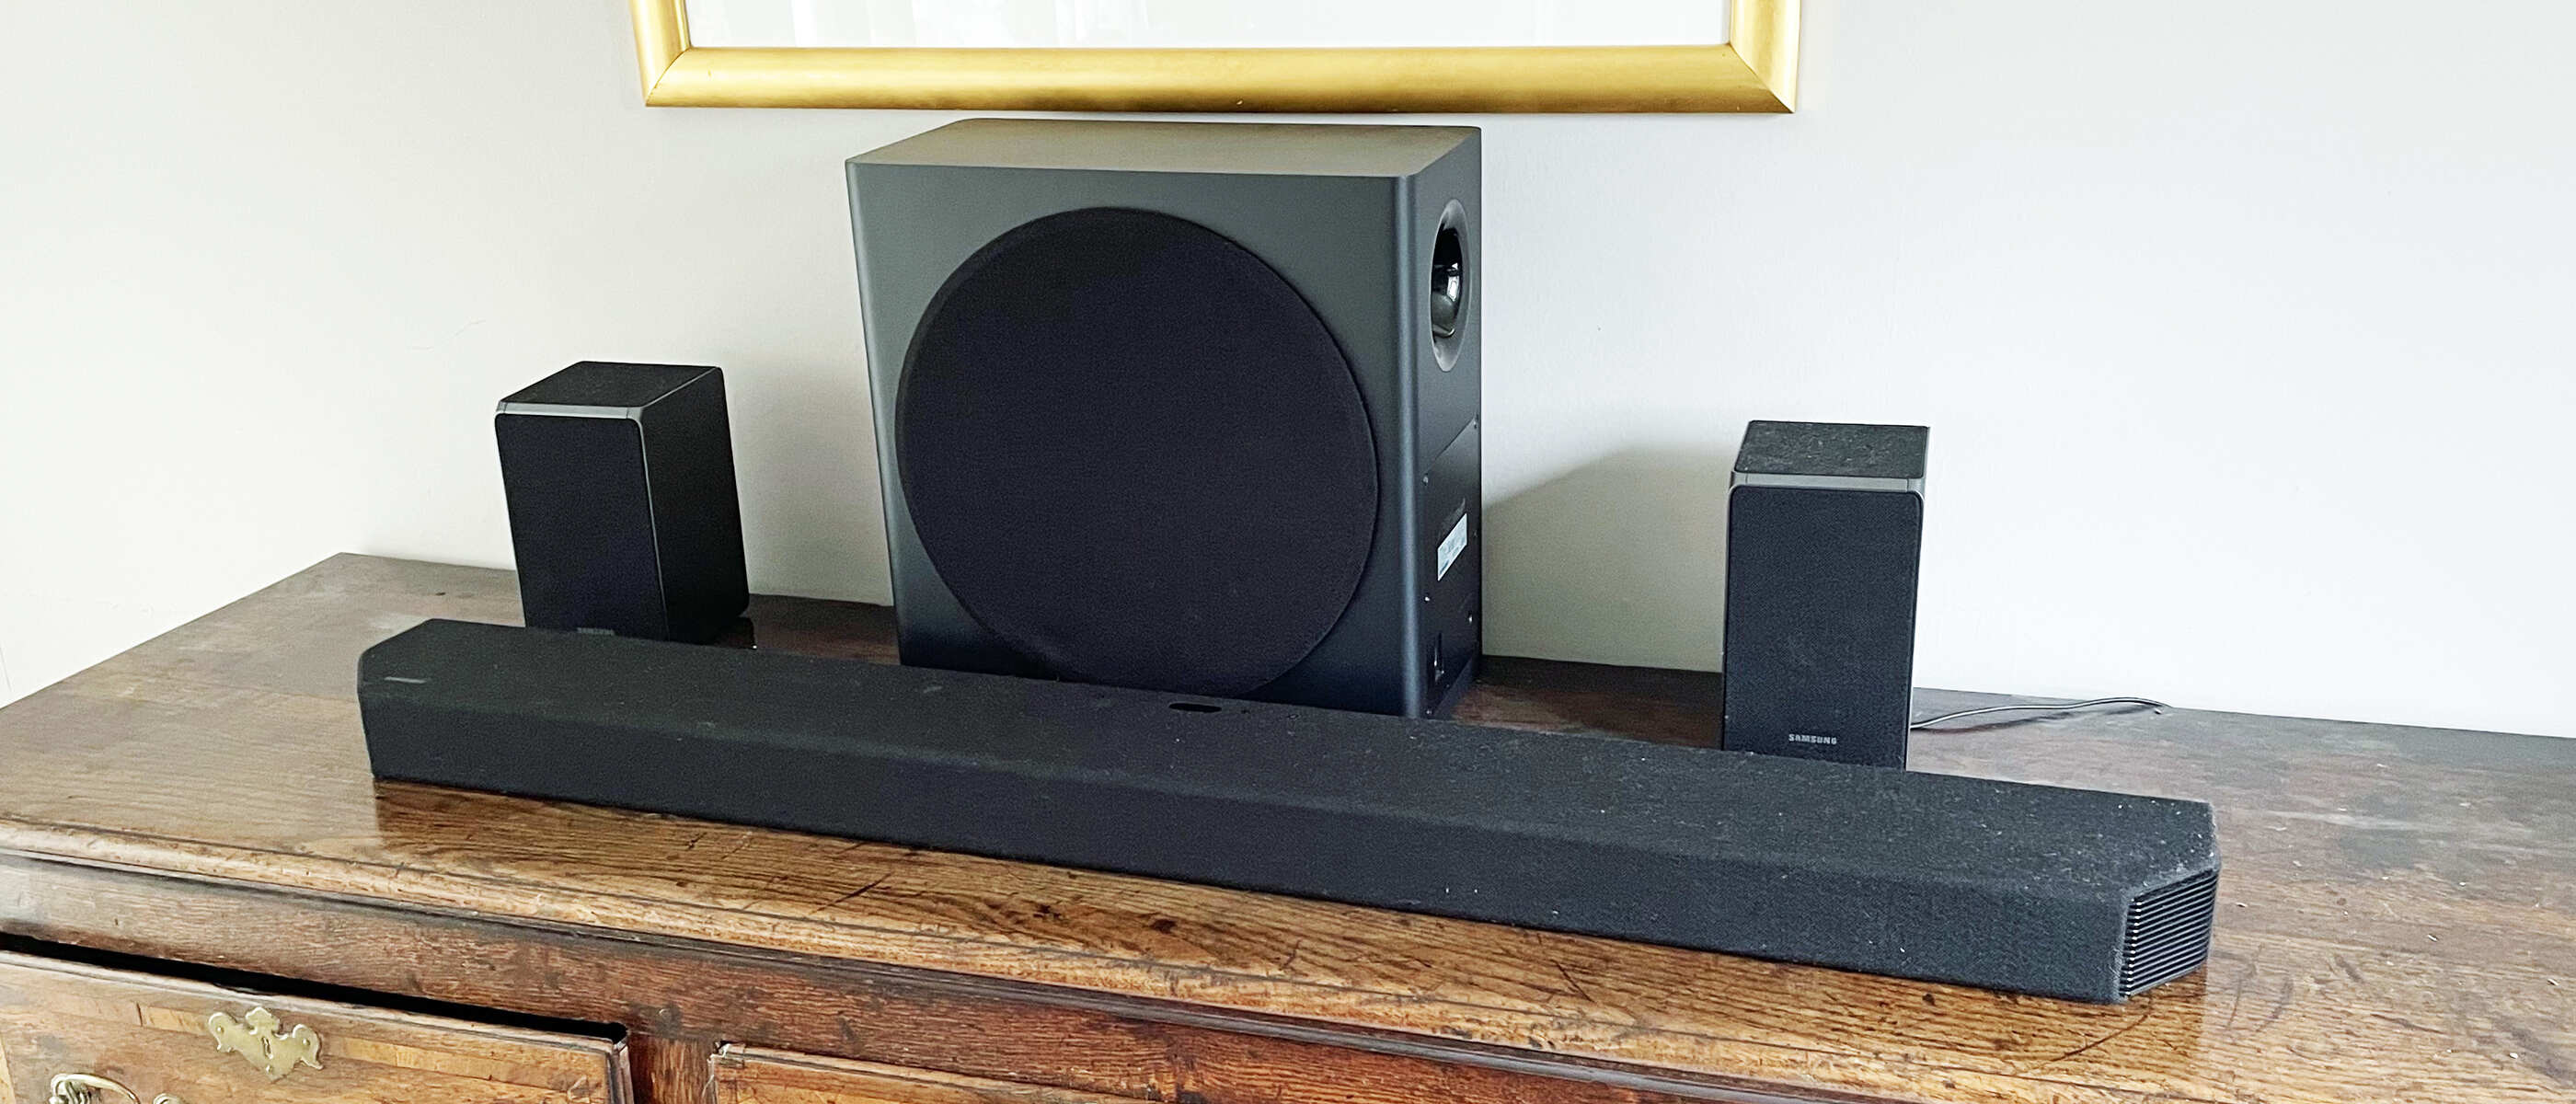 How To Turn Up Bass On A Samsung Soundbar Without A Remote